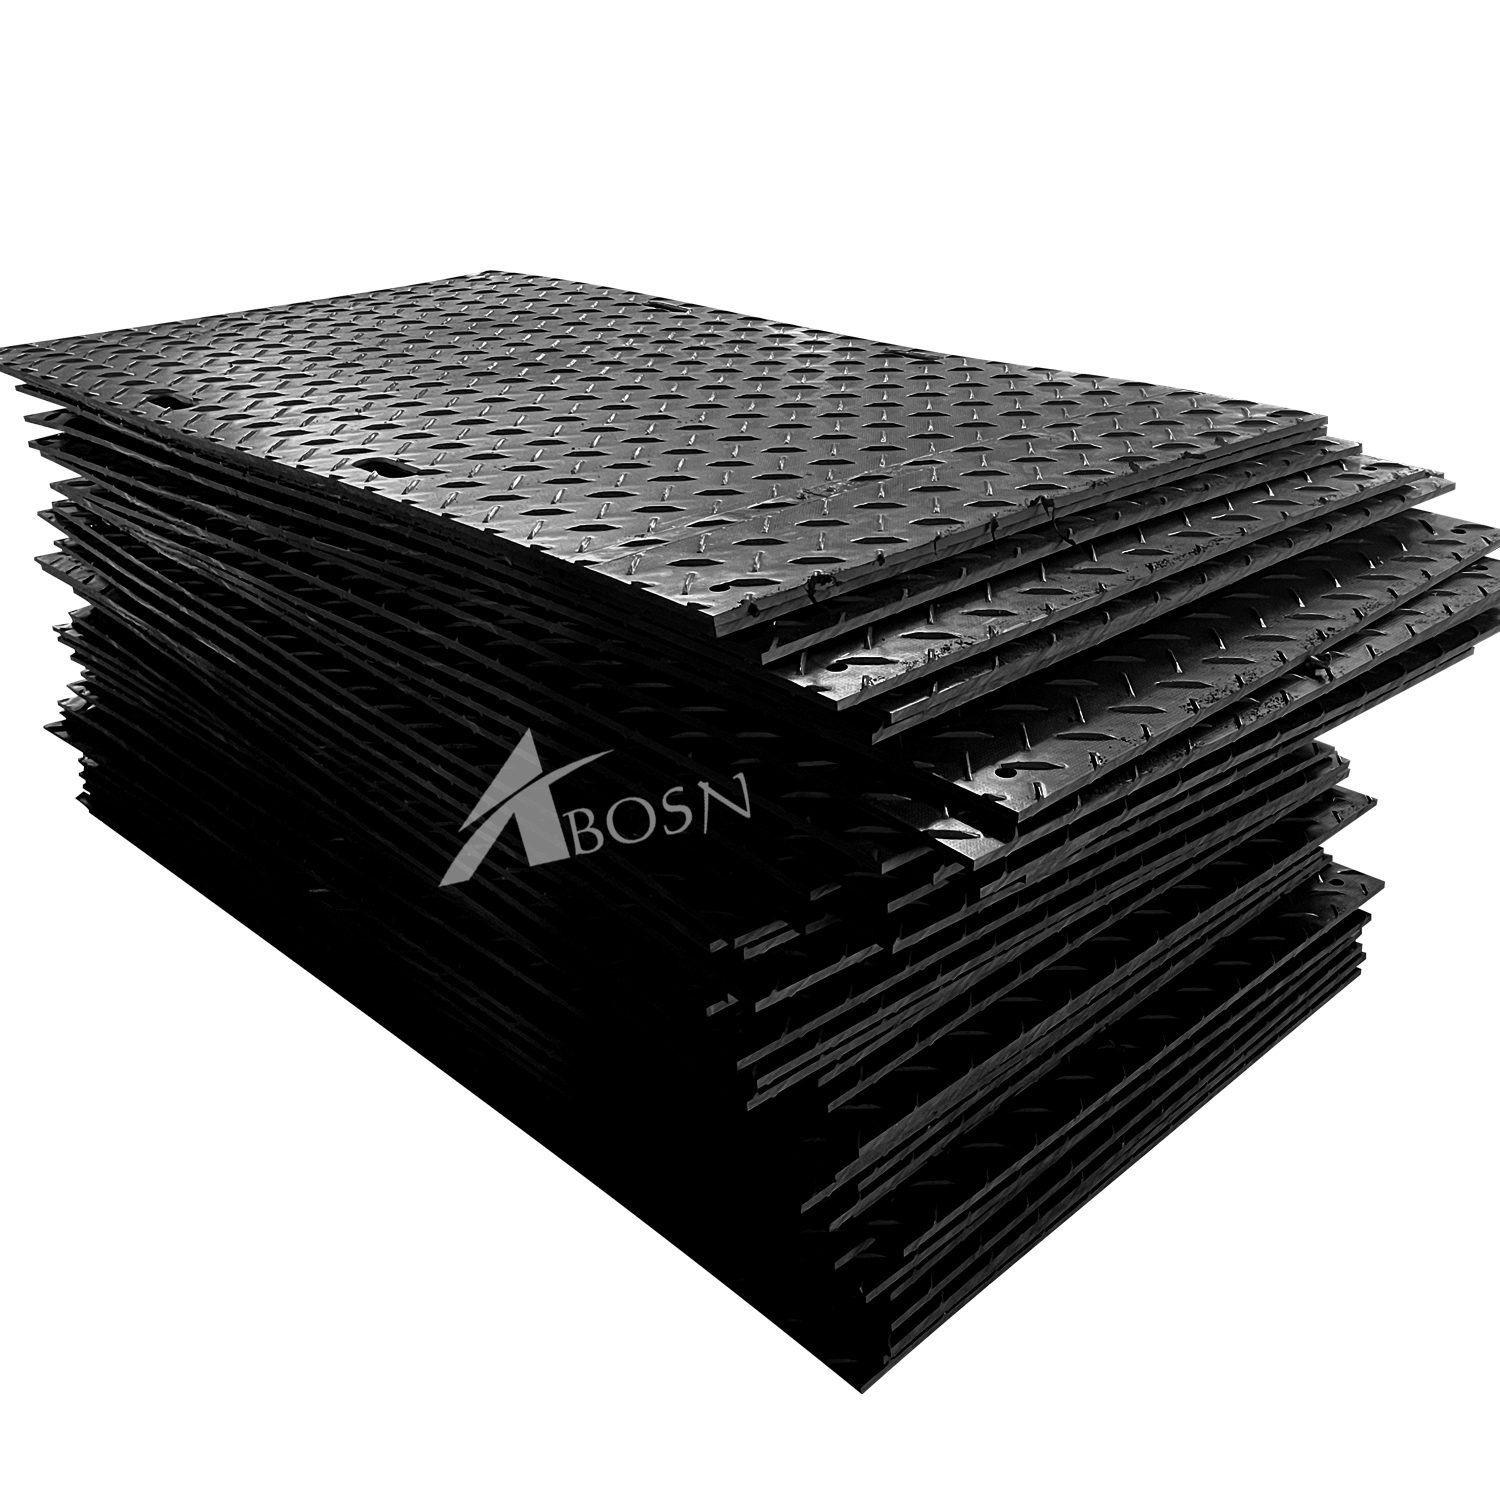 construction Industrial heavy equipment For Drilling Rig track road lawn grass Wear resistant 4x8 ft ground protection mats